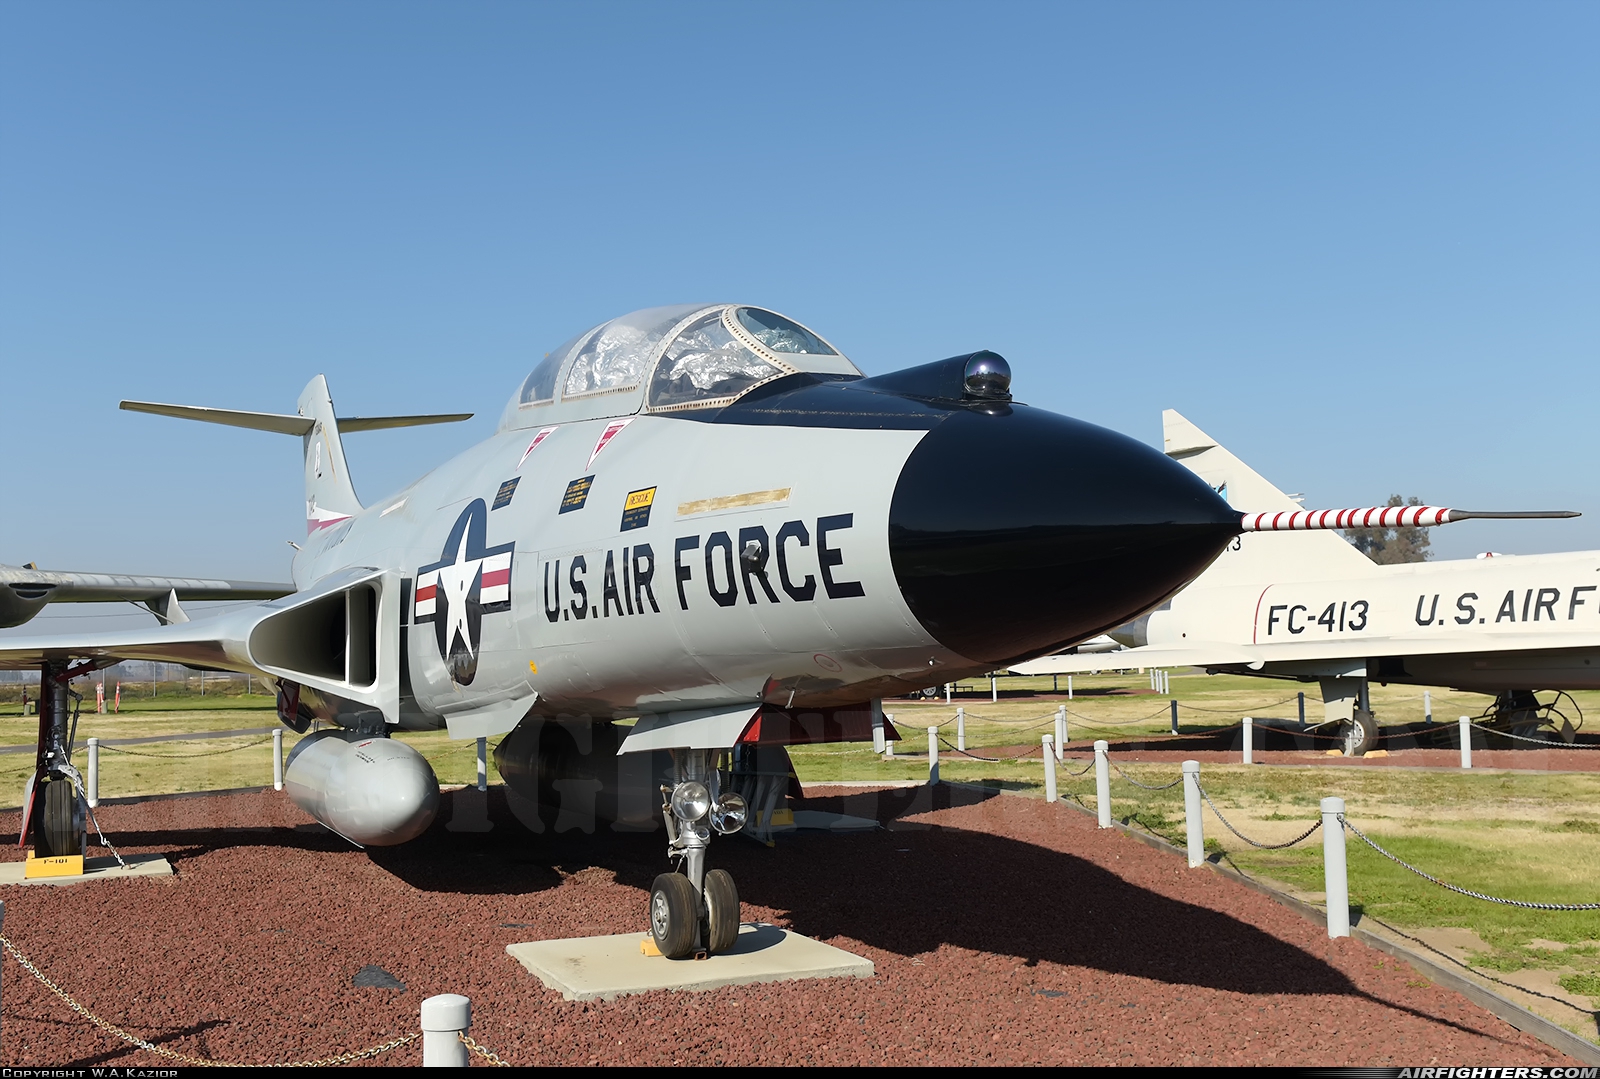 USA - Air Force McDonnell F-101B Voodoo 57-0412 at Atwater (Merced) - Castle (AFB) (MER / KMER), USA